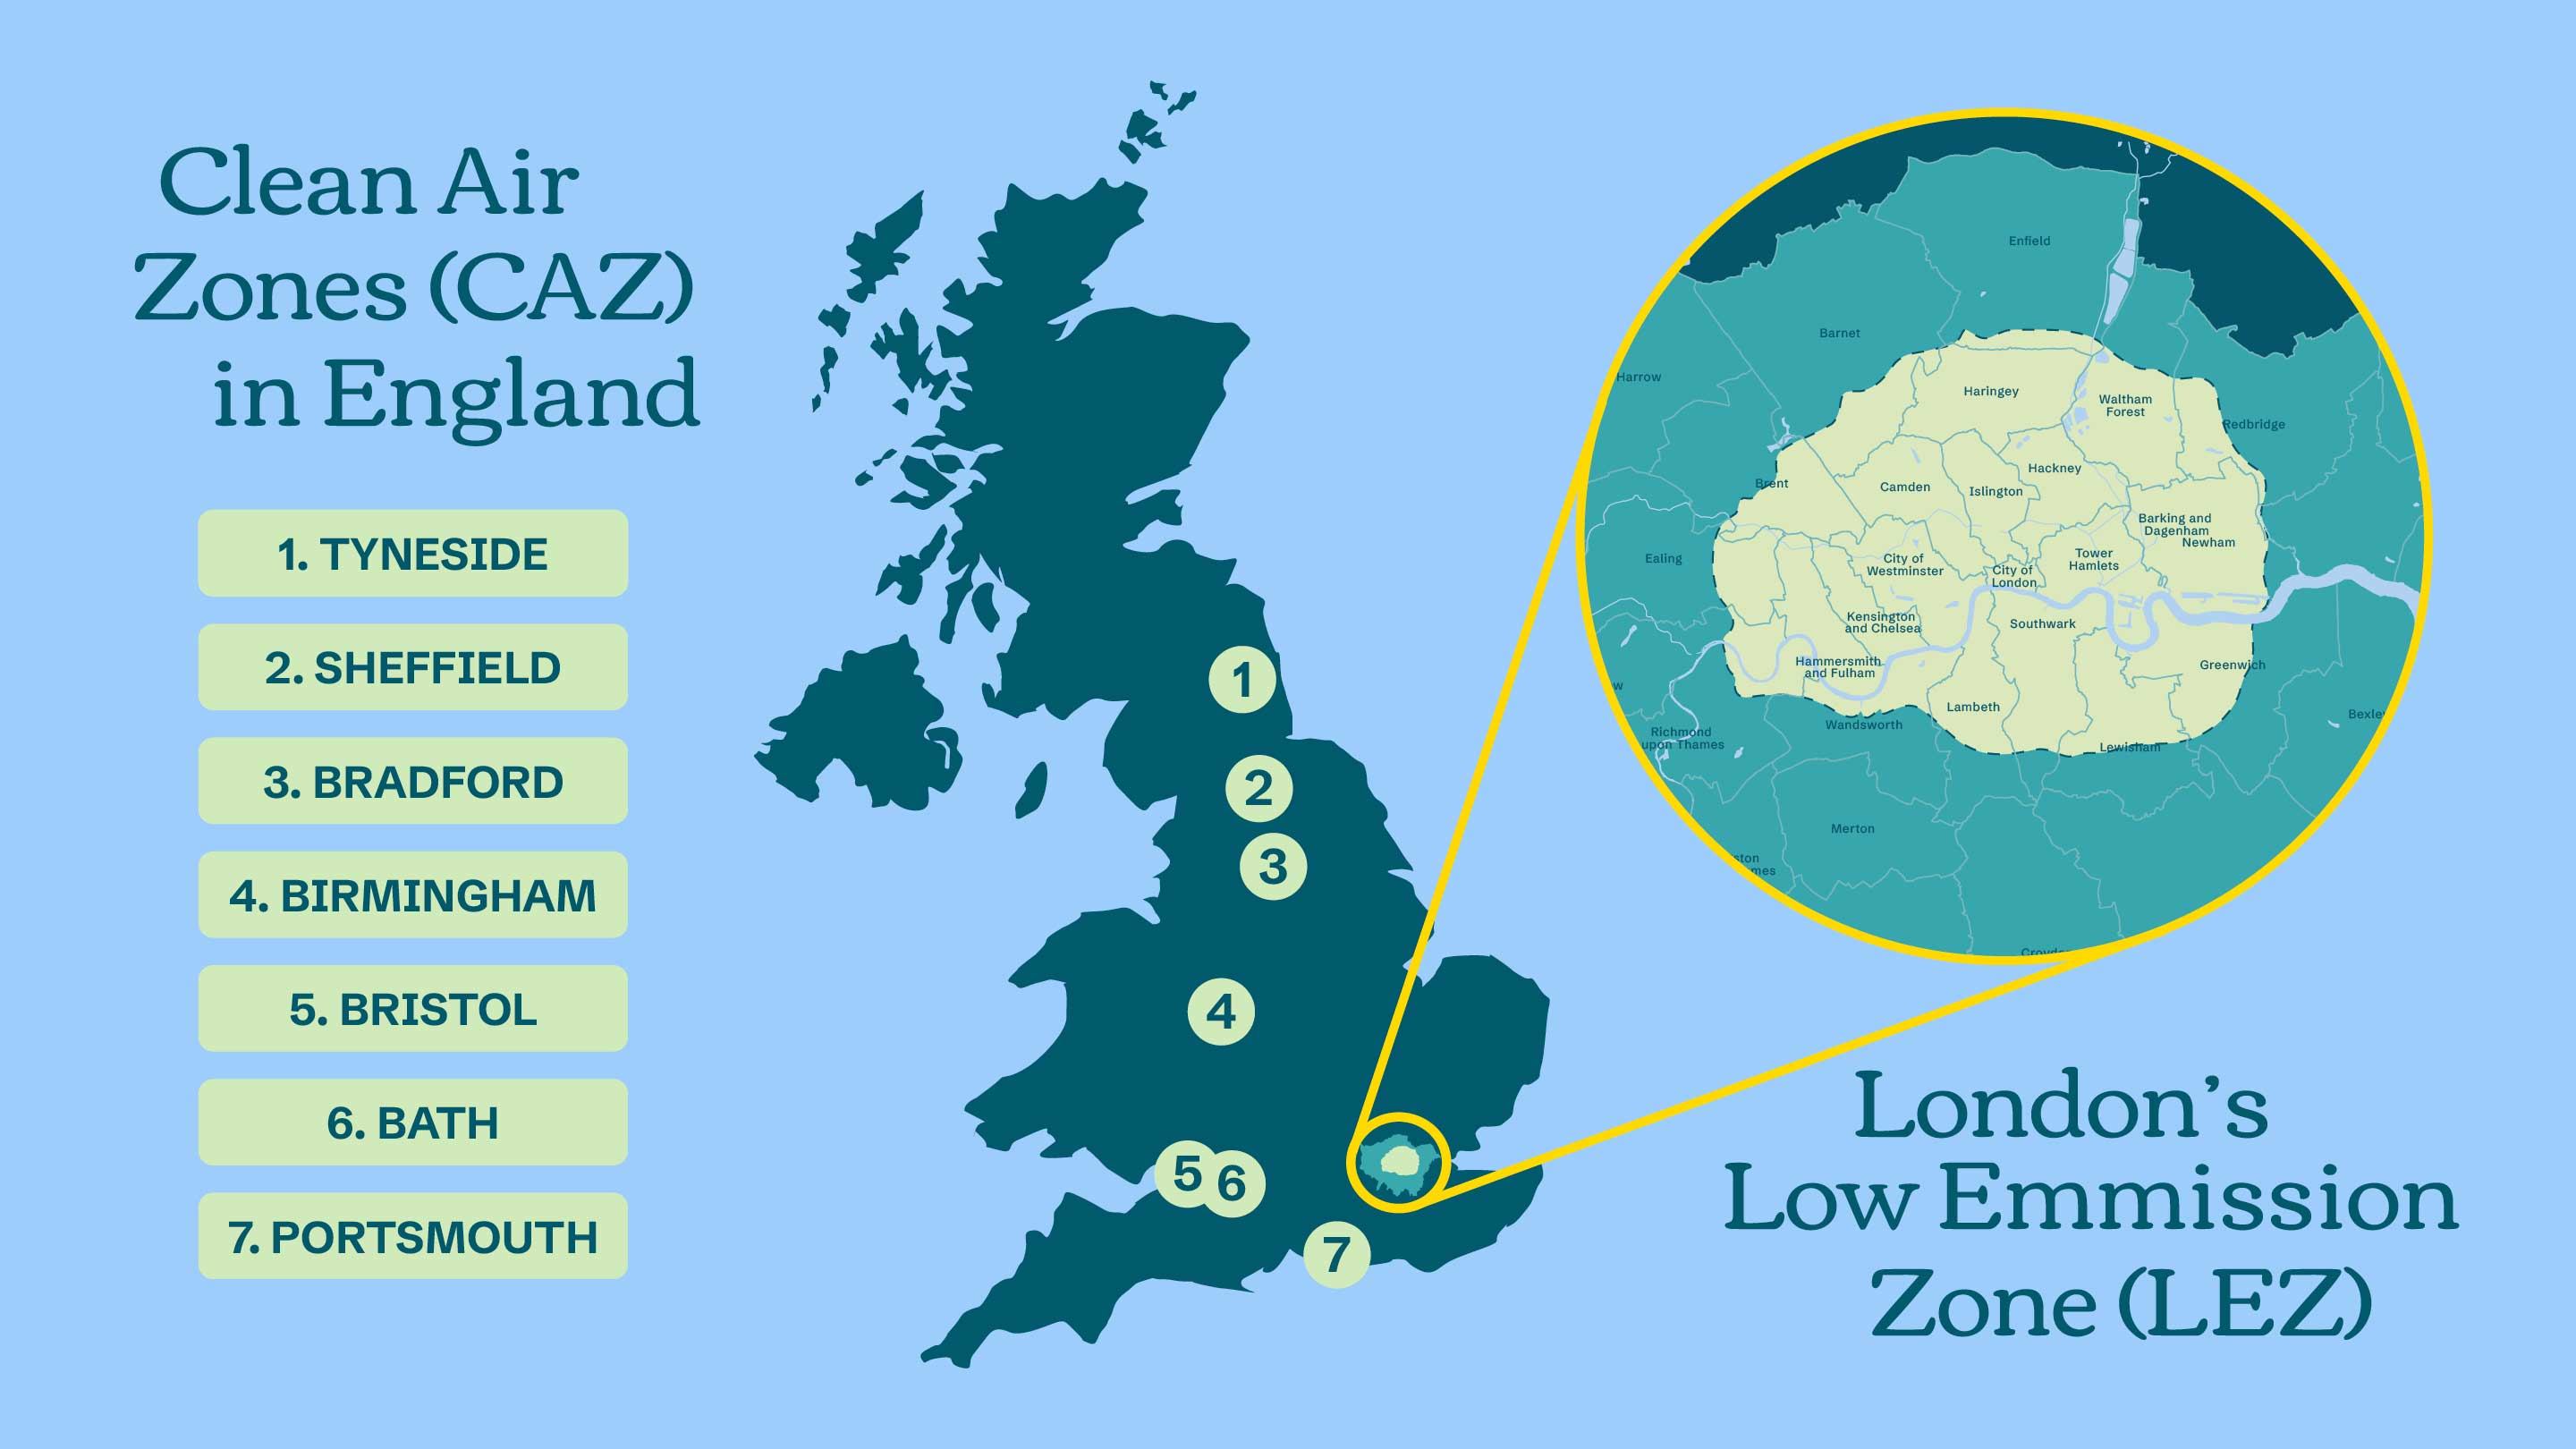 UK cities with low emission zones or clean air zones map